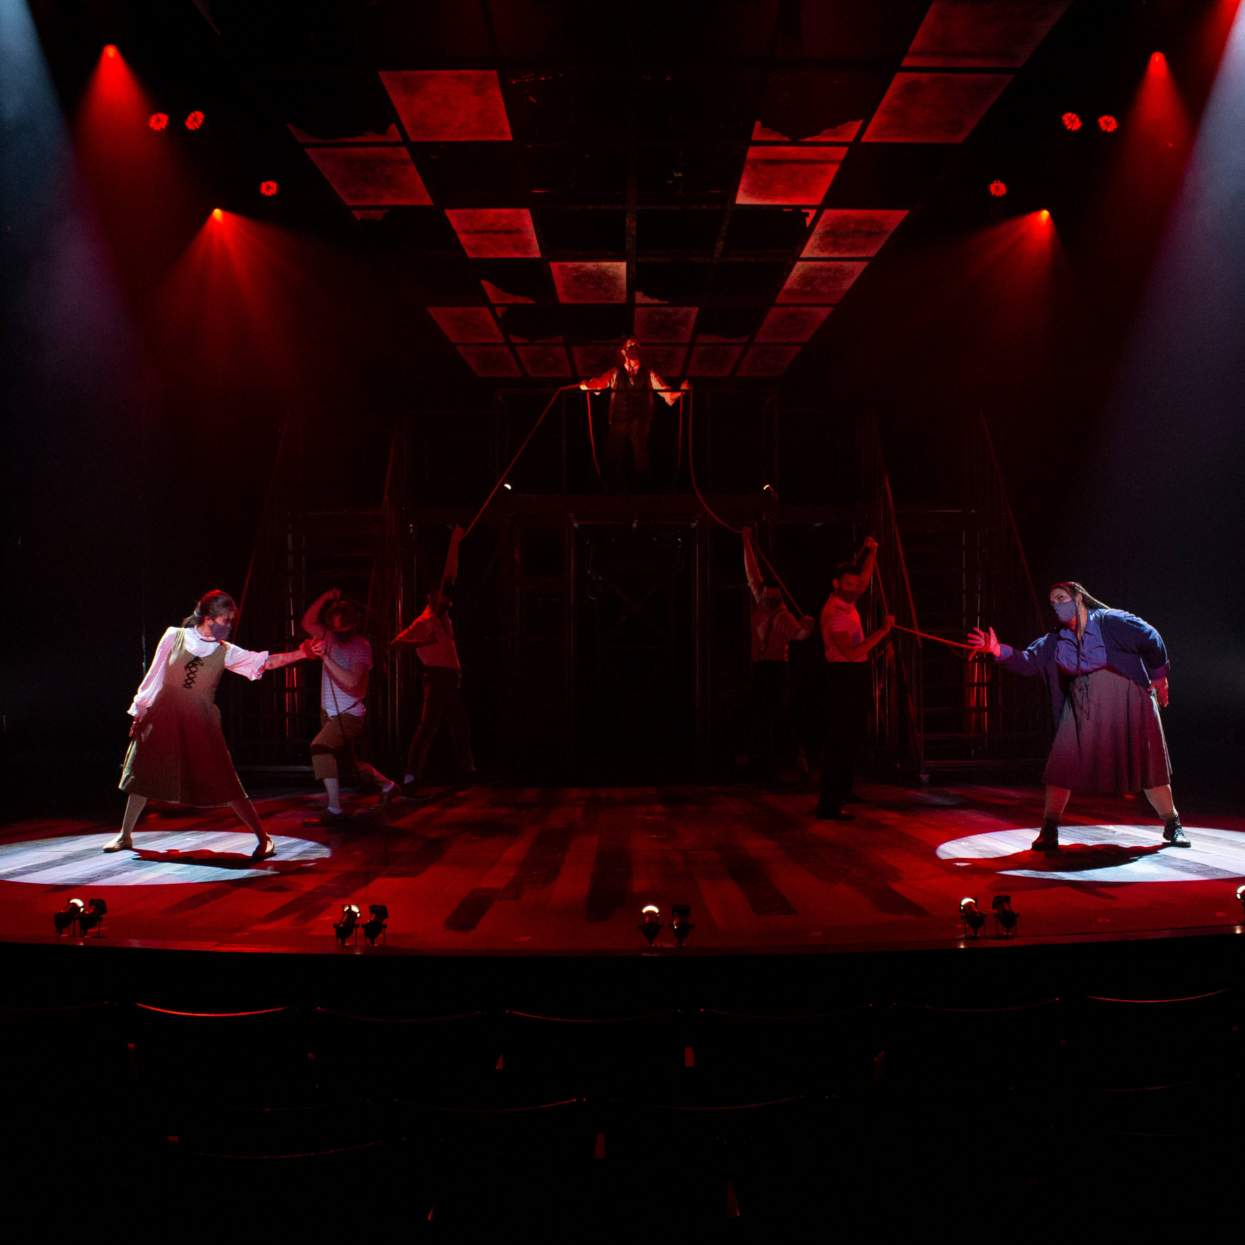 A menacing man stands on a platform above two young girls. He holds red ropes which are tied to each of the girls hands, binding them to him. Male figures, hold on to the ropes and pull on them, jerking the girls and keeping them apart from each other. The stage is washing in red light, and their are spotlights on each of the girls.